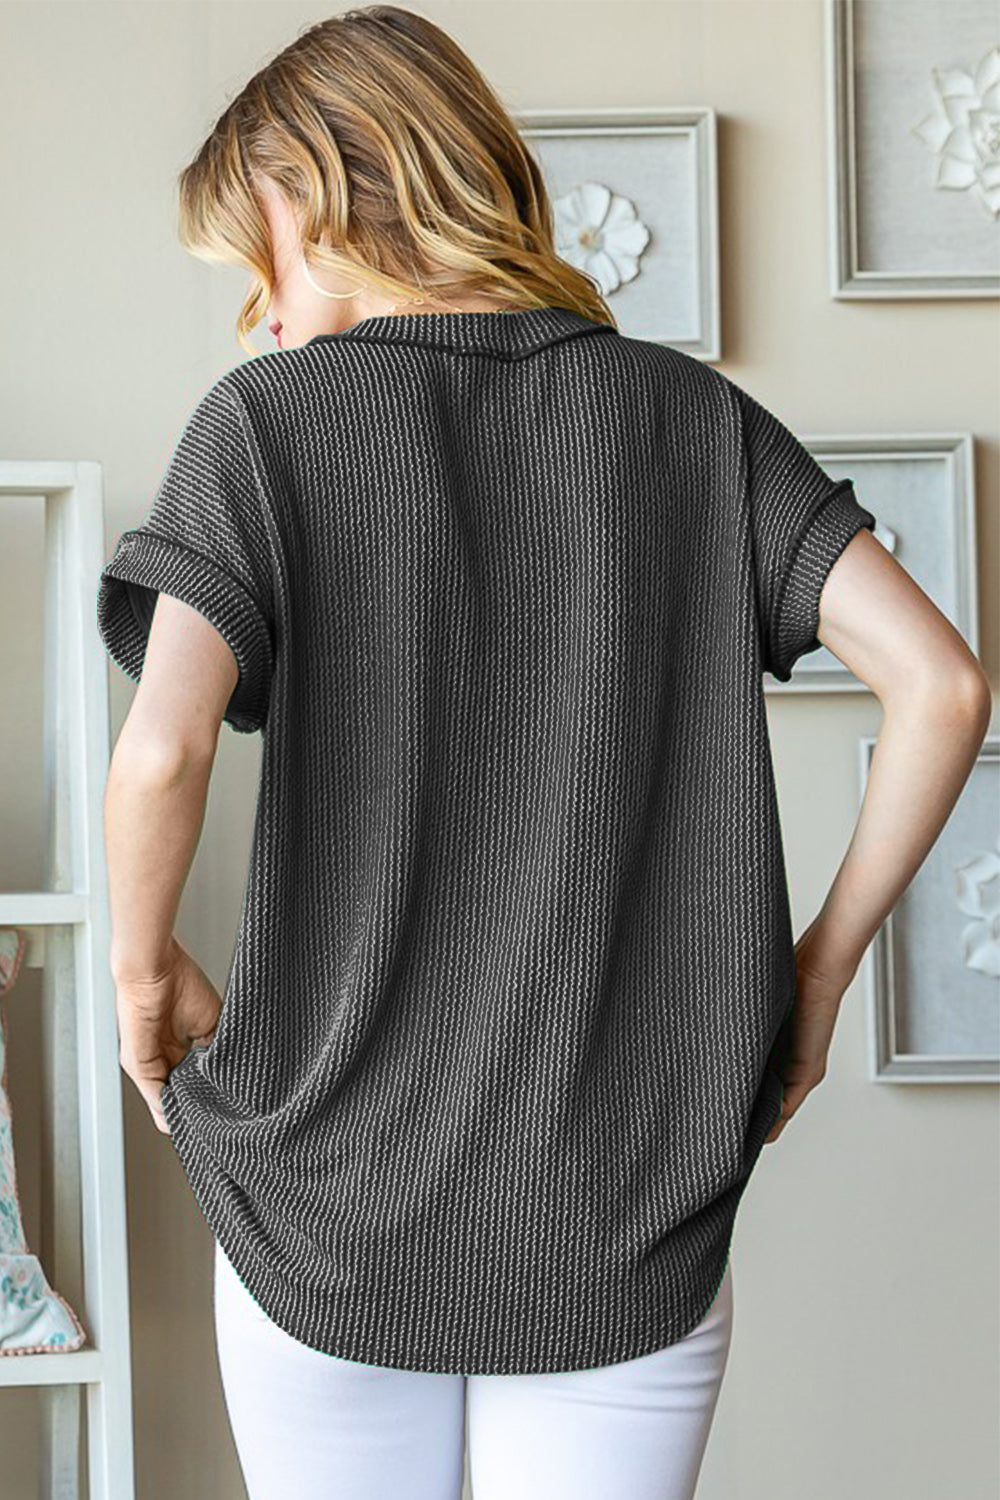 Short Sleeve V-Neck Rib Knit Top in Charcoal